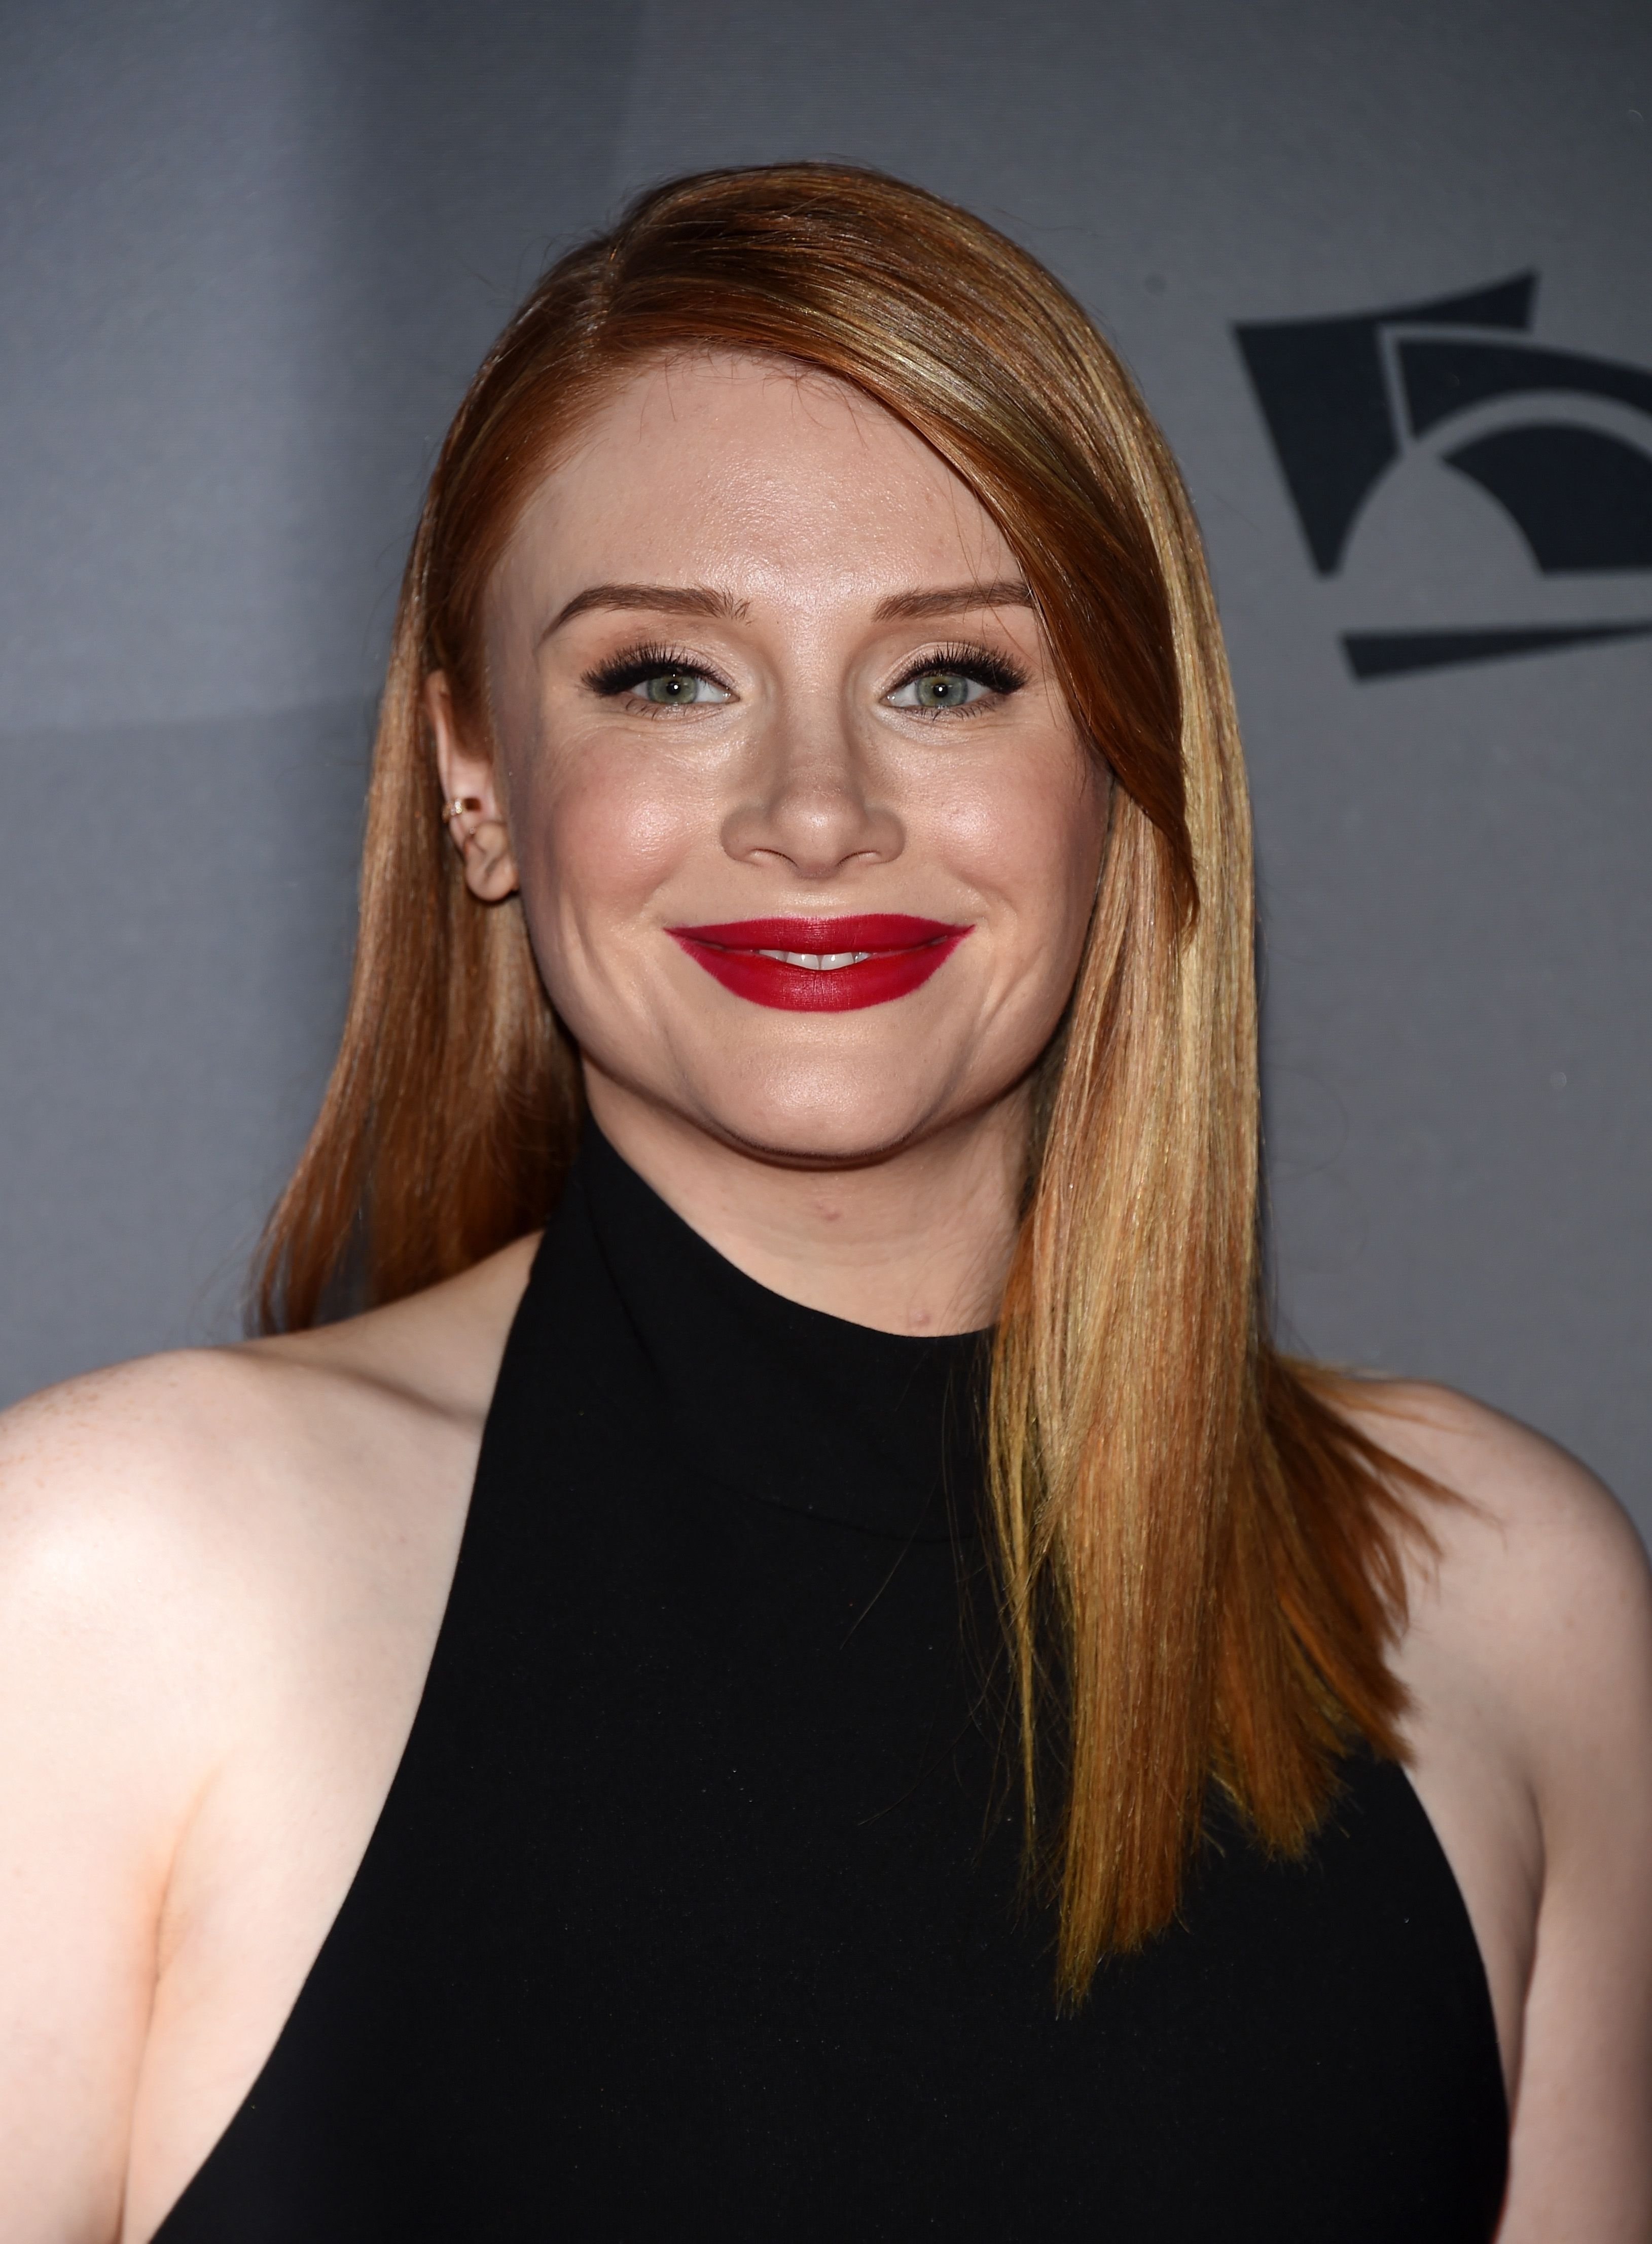 Was Bryce Dallas Howard in ‘Twilight’? News and Gossip